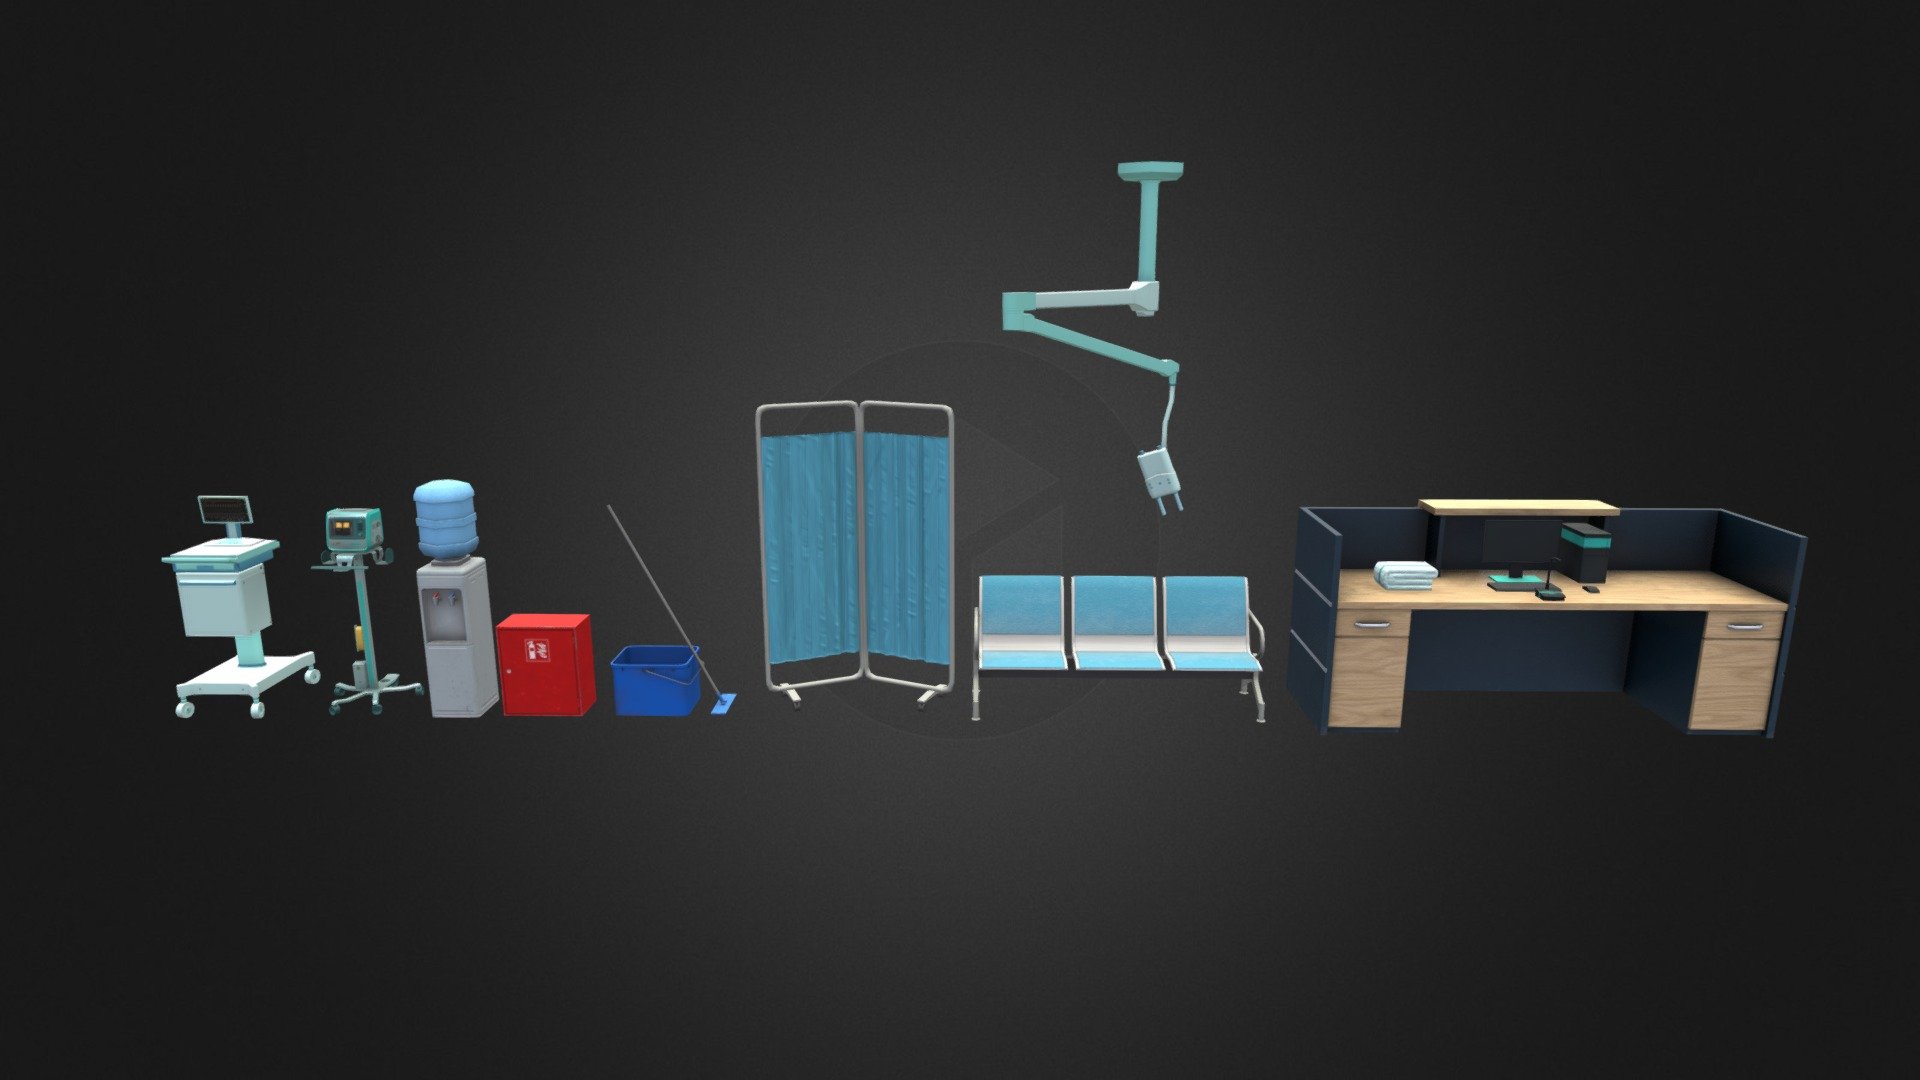 This is a pack of hospital props I modeled for a VR title called BraveR. 

Link to the game: https://www.oculus.com/experiences/quest/5565807970104952/

Software used: Blender, Substance Painter 

Textures: 2K - VR ready hospital props - 3D model by Grish_Avetisyan 3d model